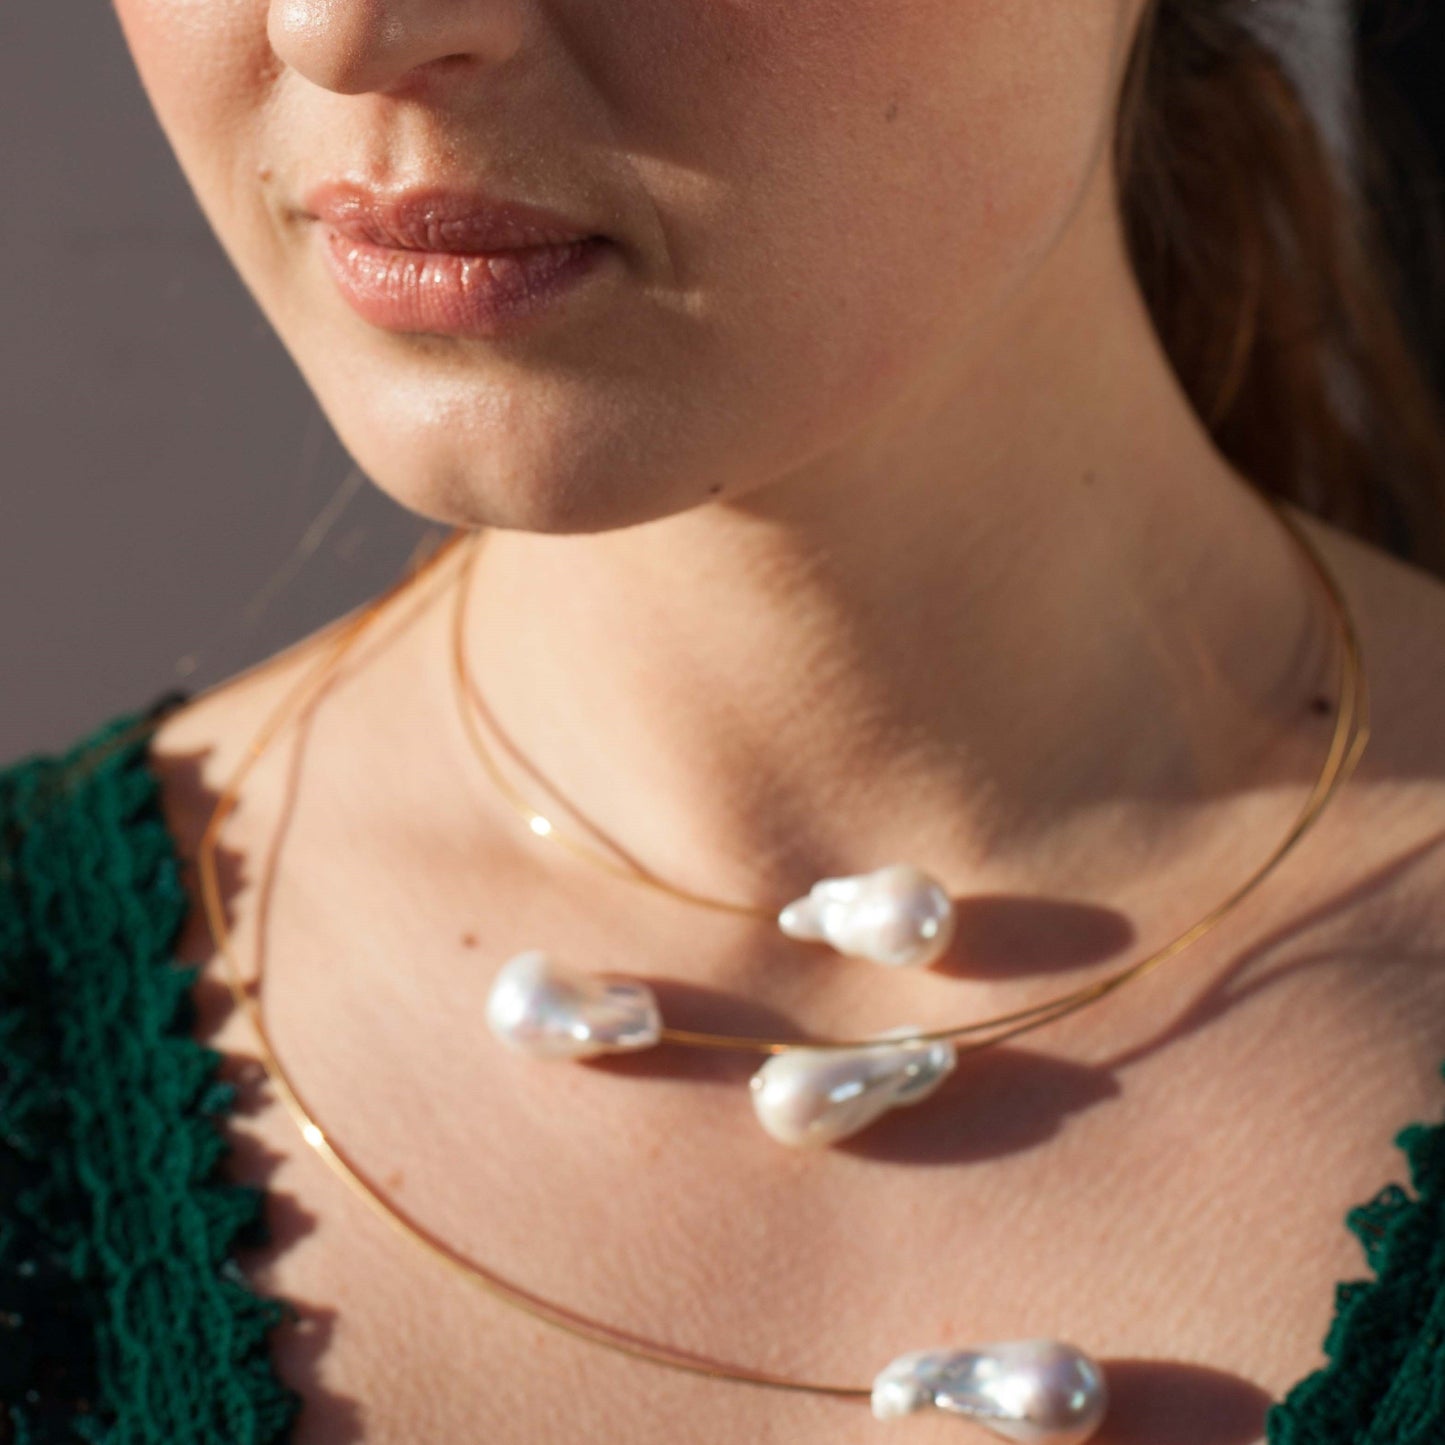 Asymmetric Neckwire with Large White Baroque Pearls